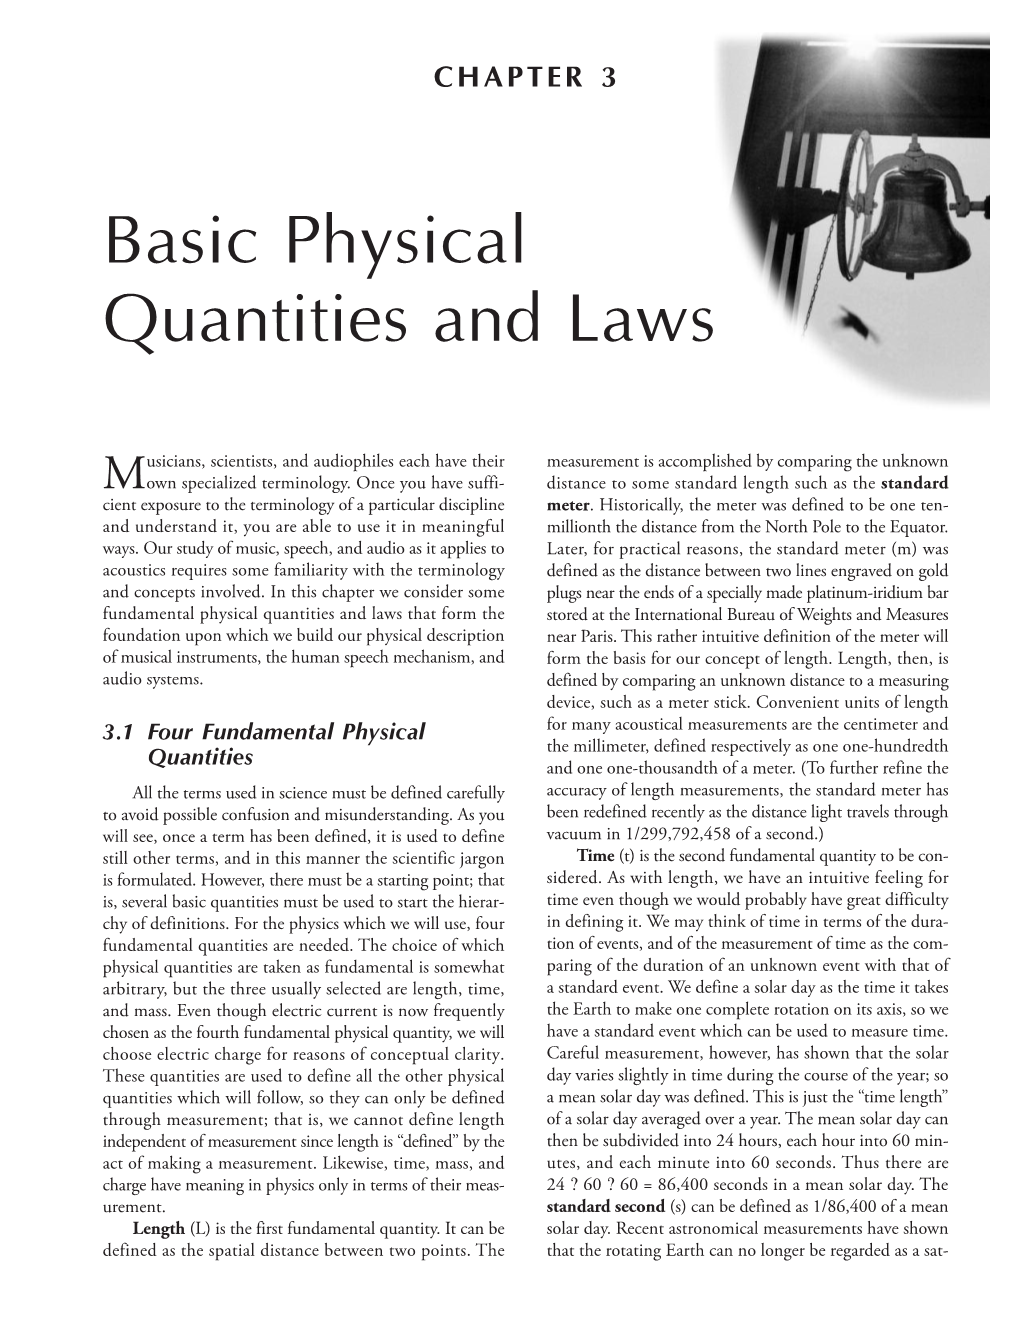 Basic Physical Quantities and Laws